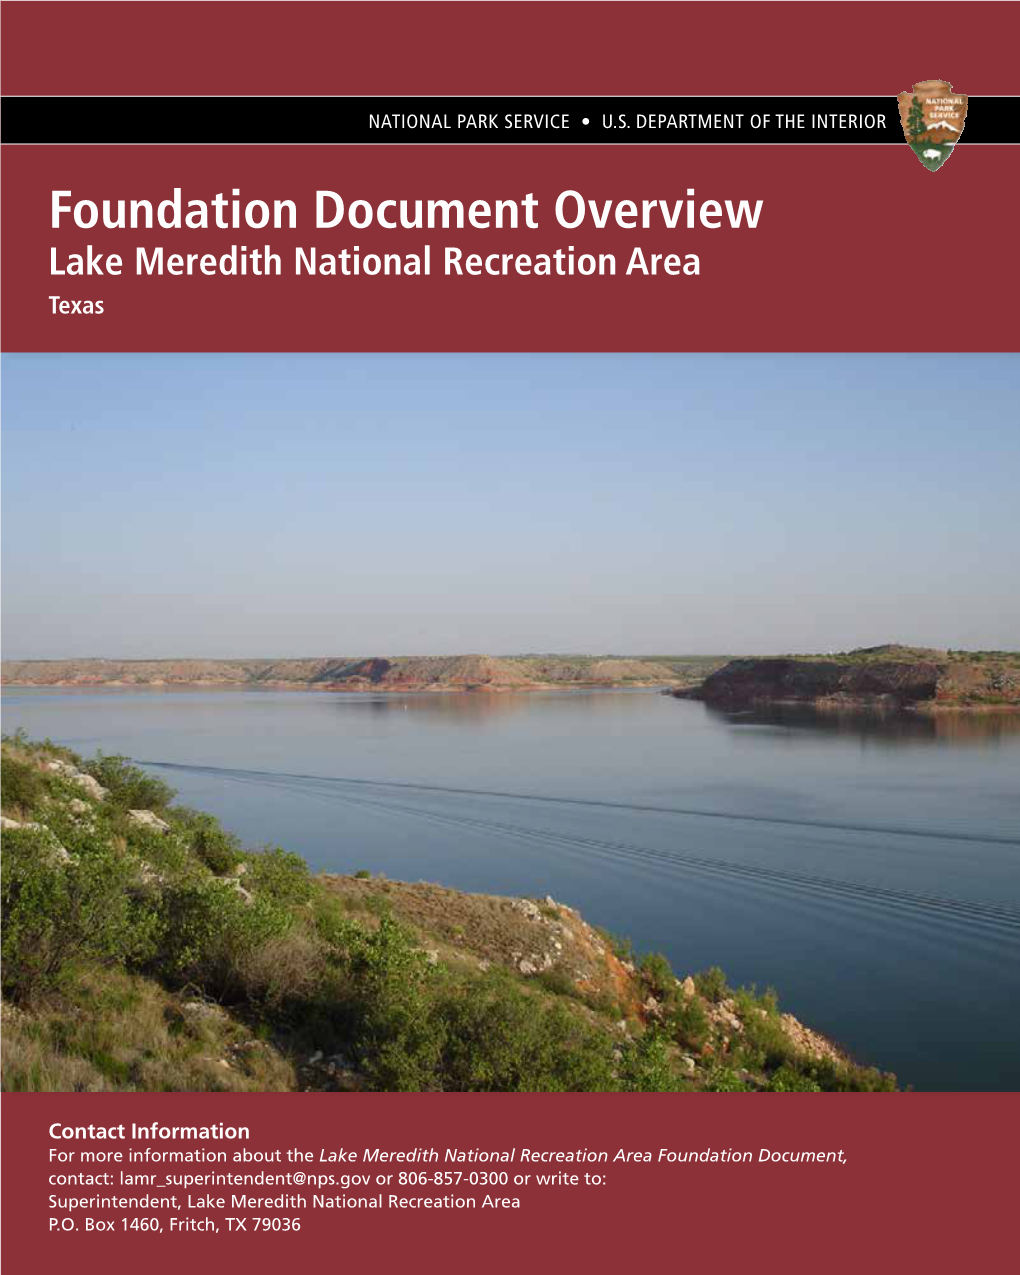 Foundation Document Overview, Lake Meredith National Recreation Area